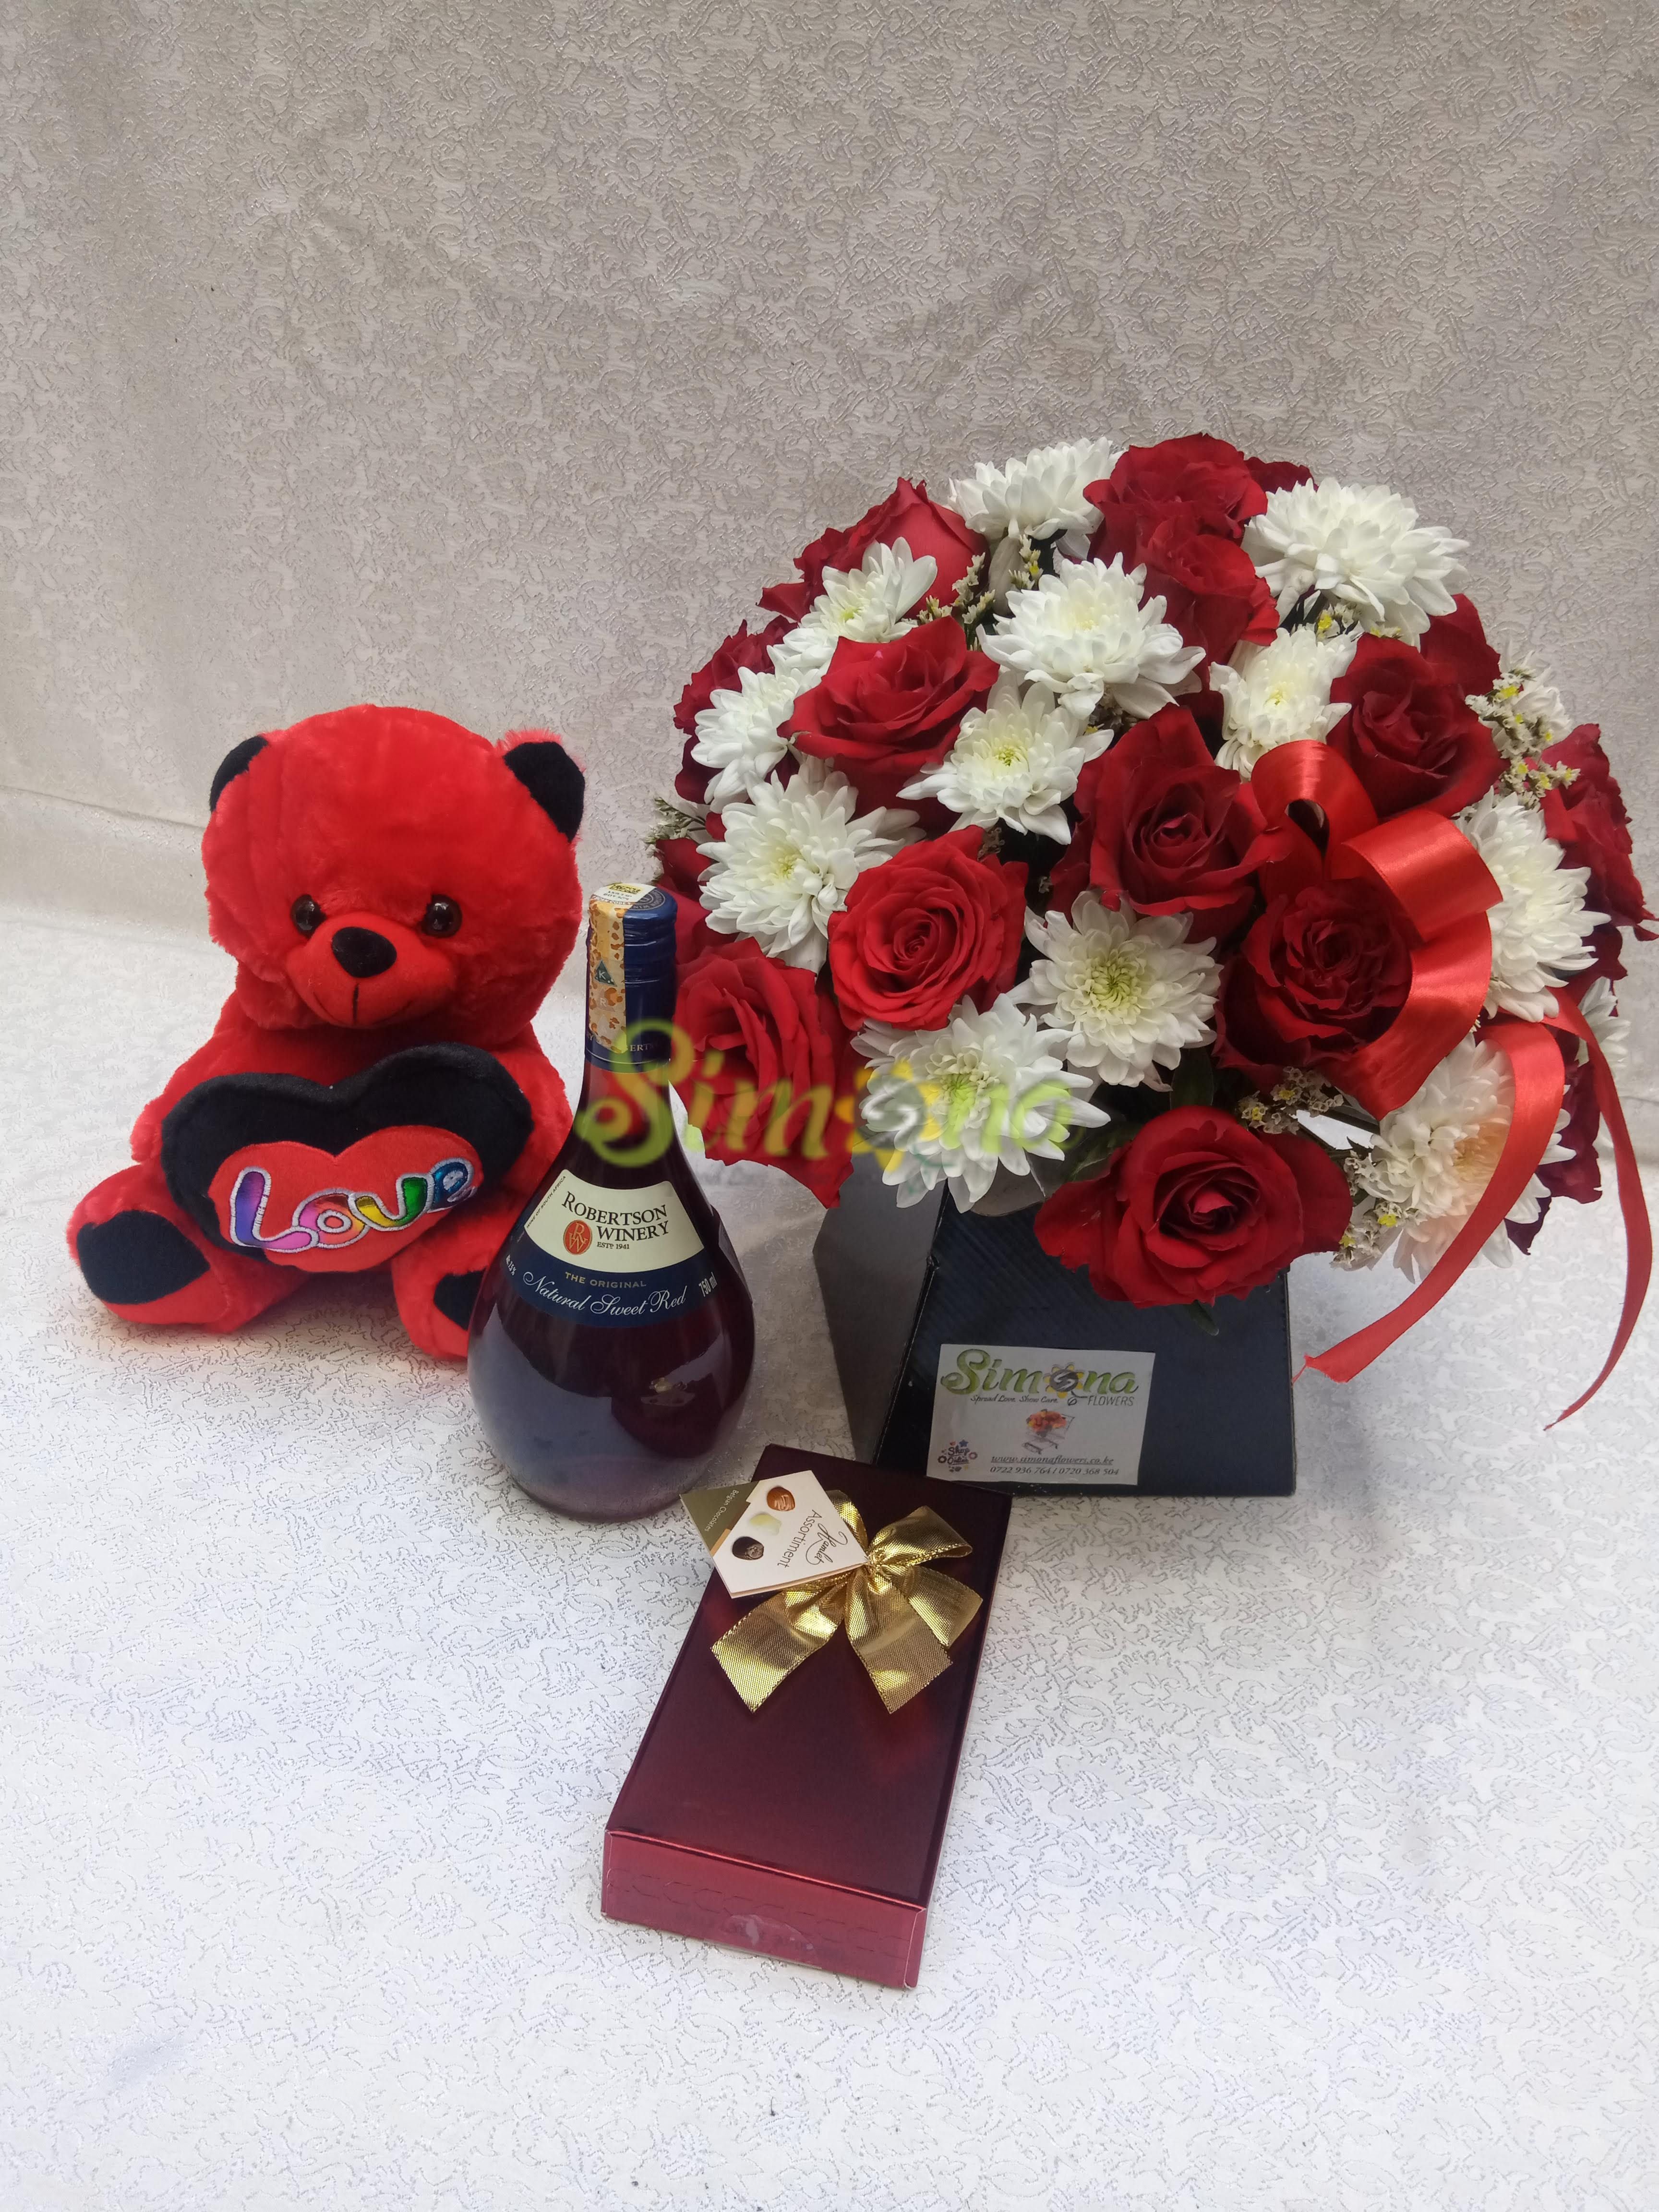 Adorable bouquet with teddy bear, Guylian chocolate and red wine